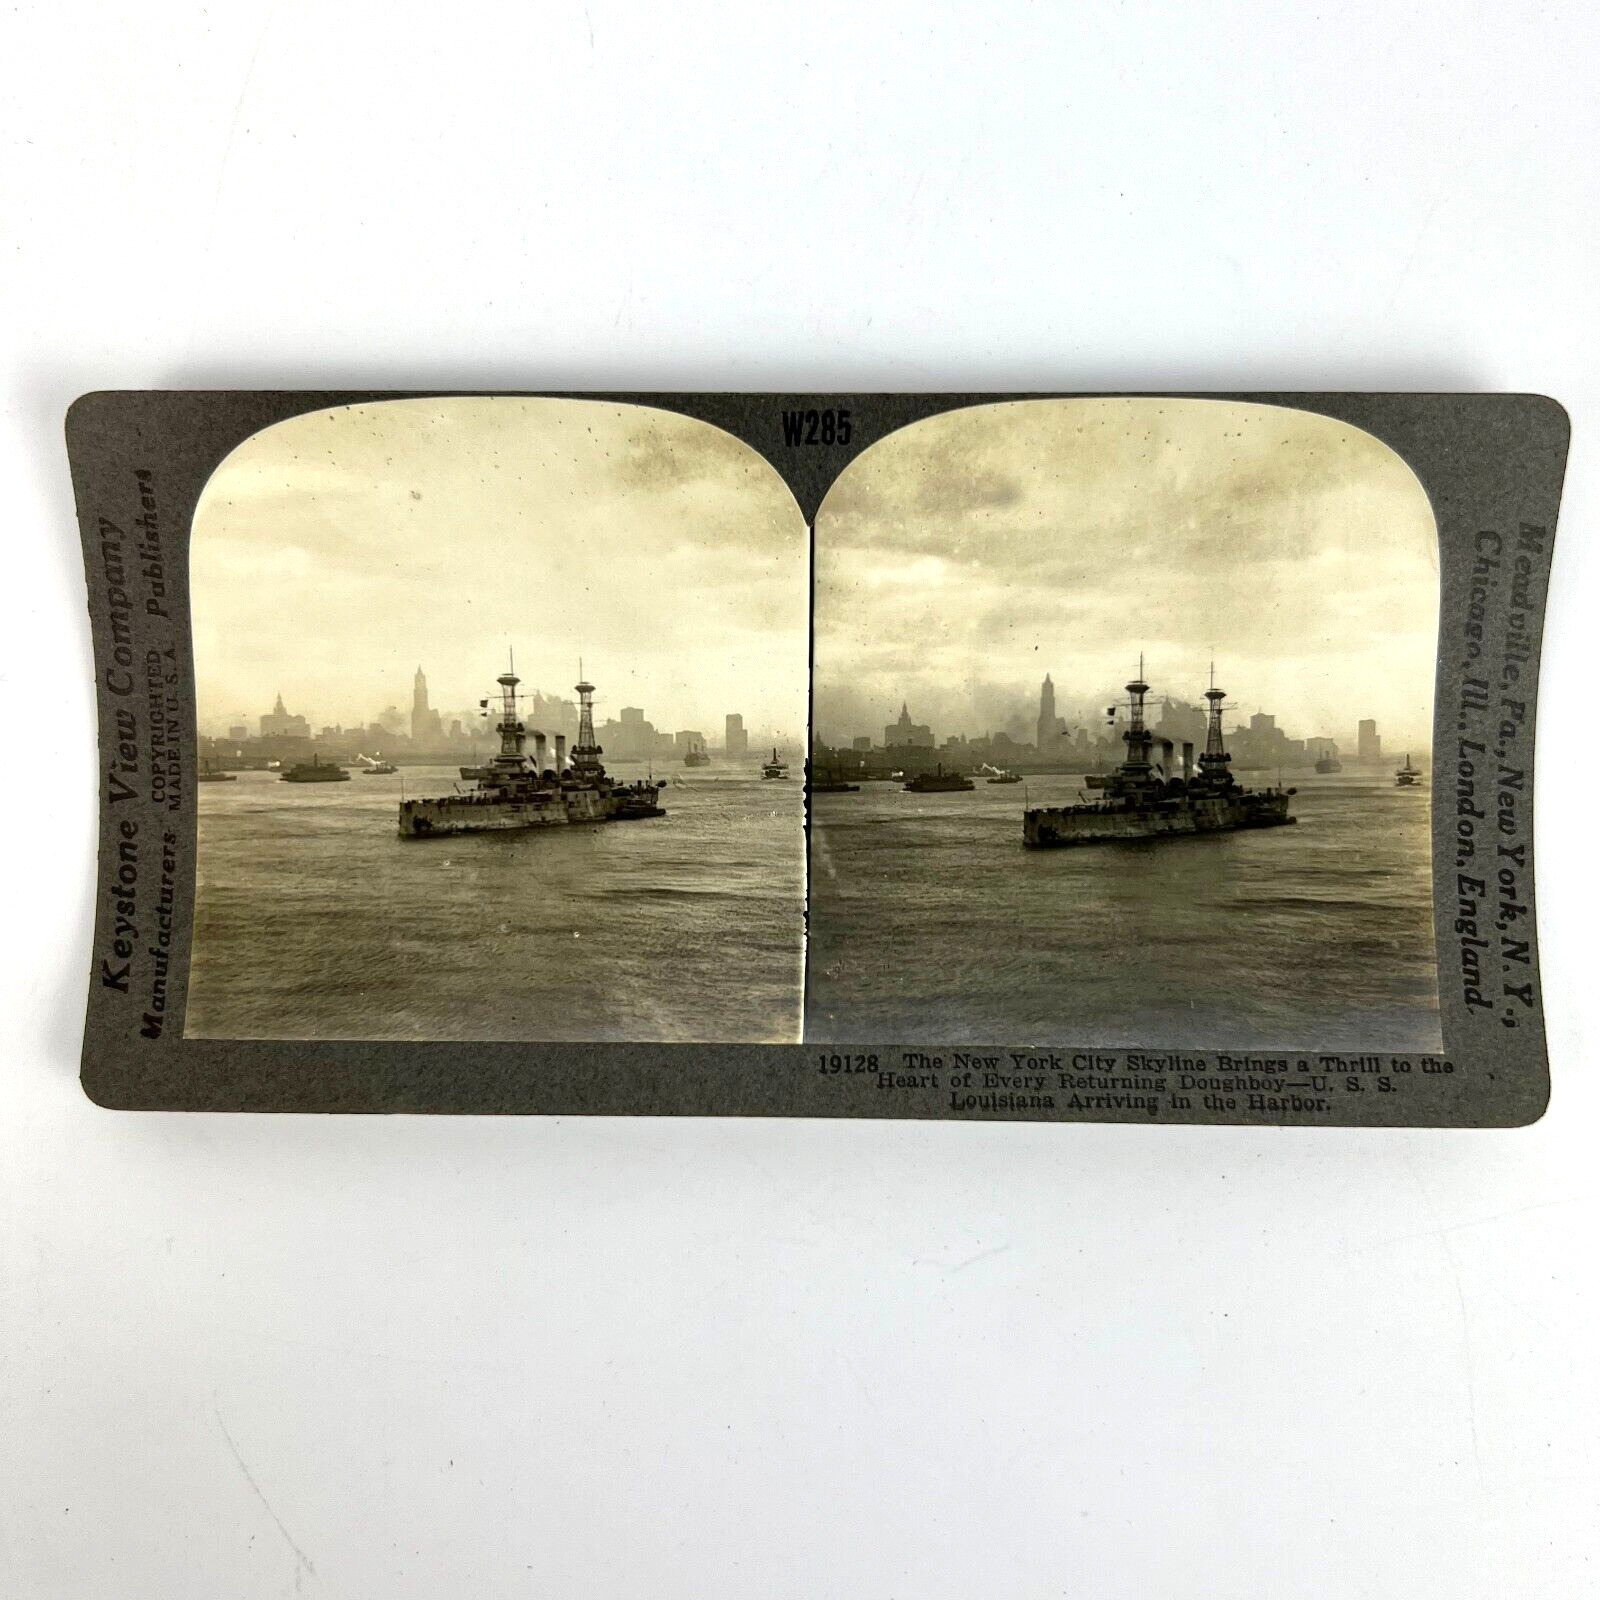 Antique WWI Photos Keystone View Co Stereograph U.S.S. Louisiana Arriving 19128